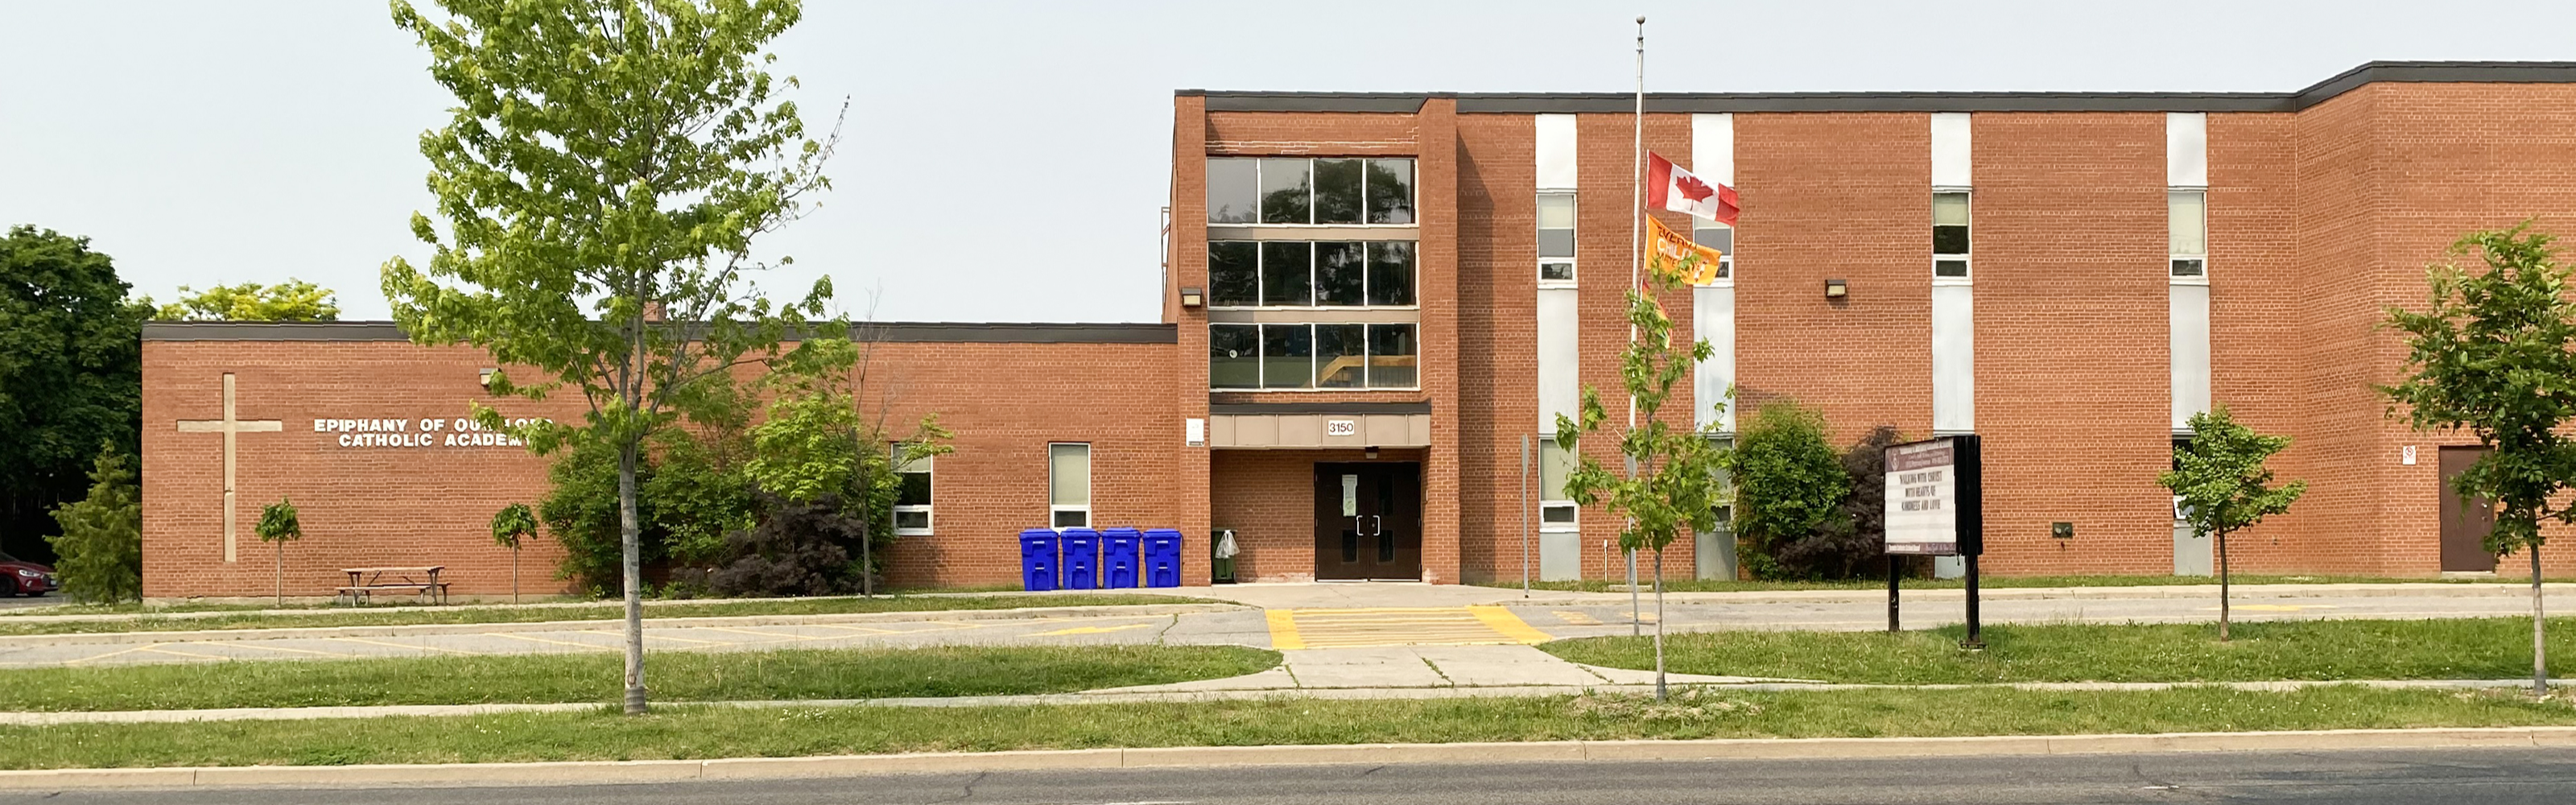 Front of the Epiphany of Our Lord Catholic School building